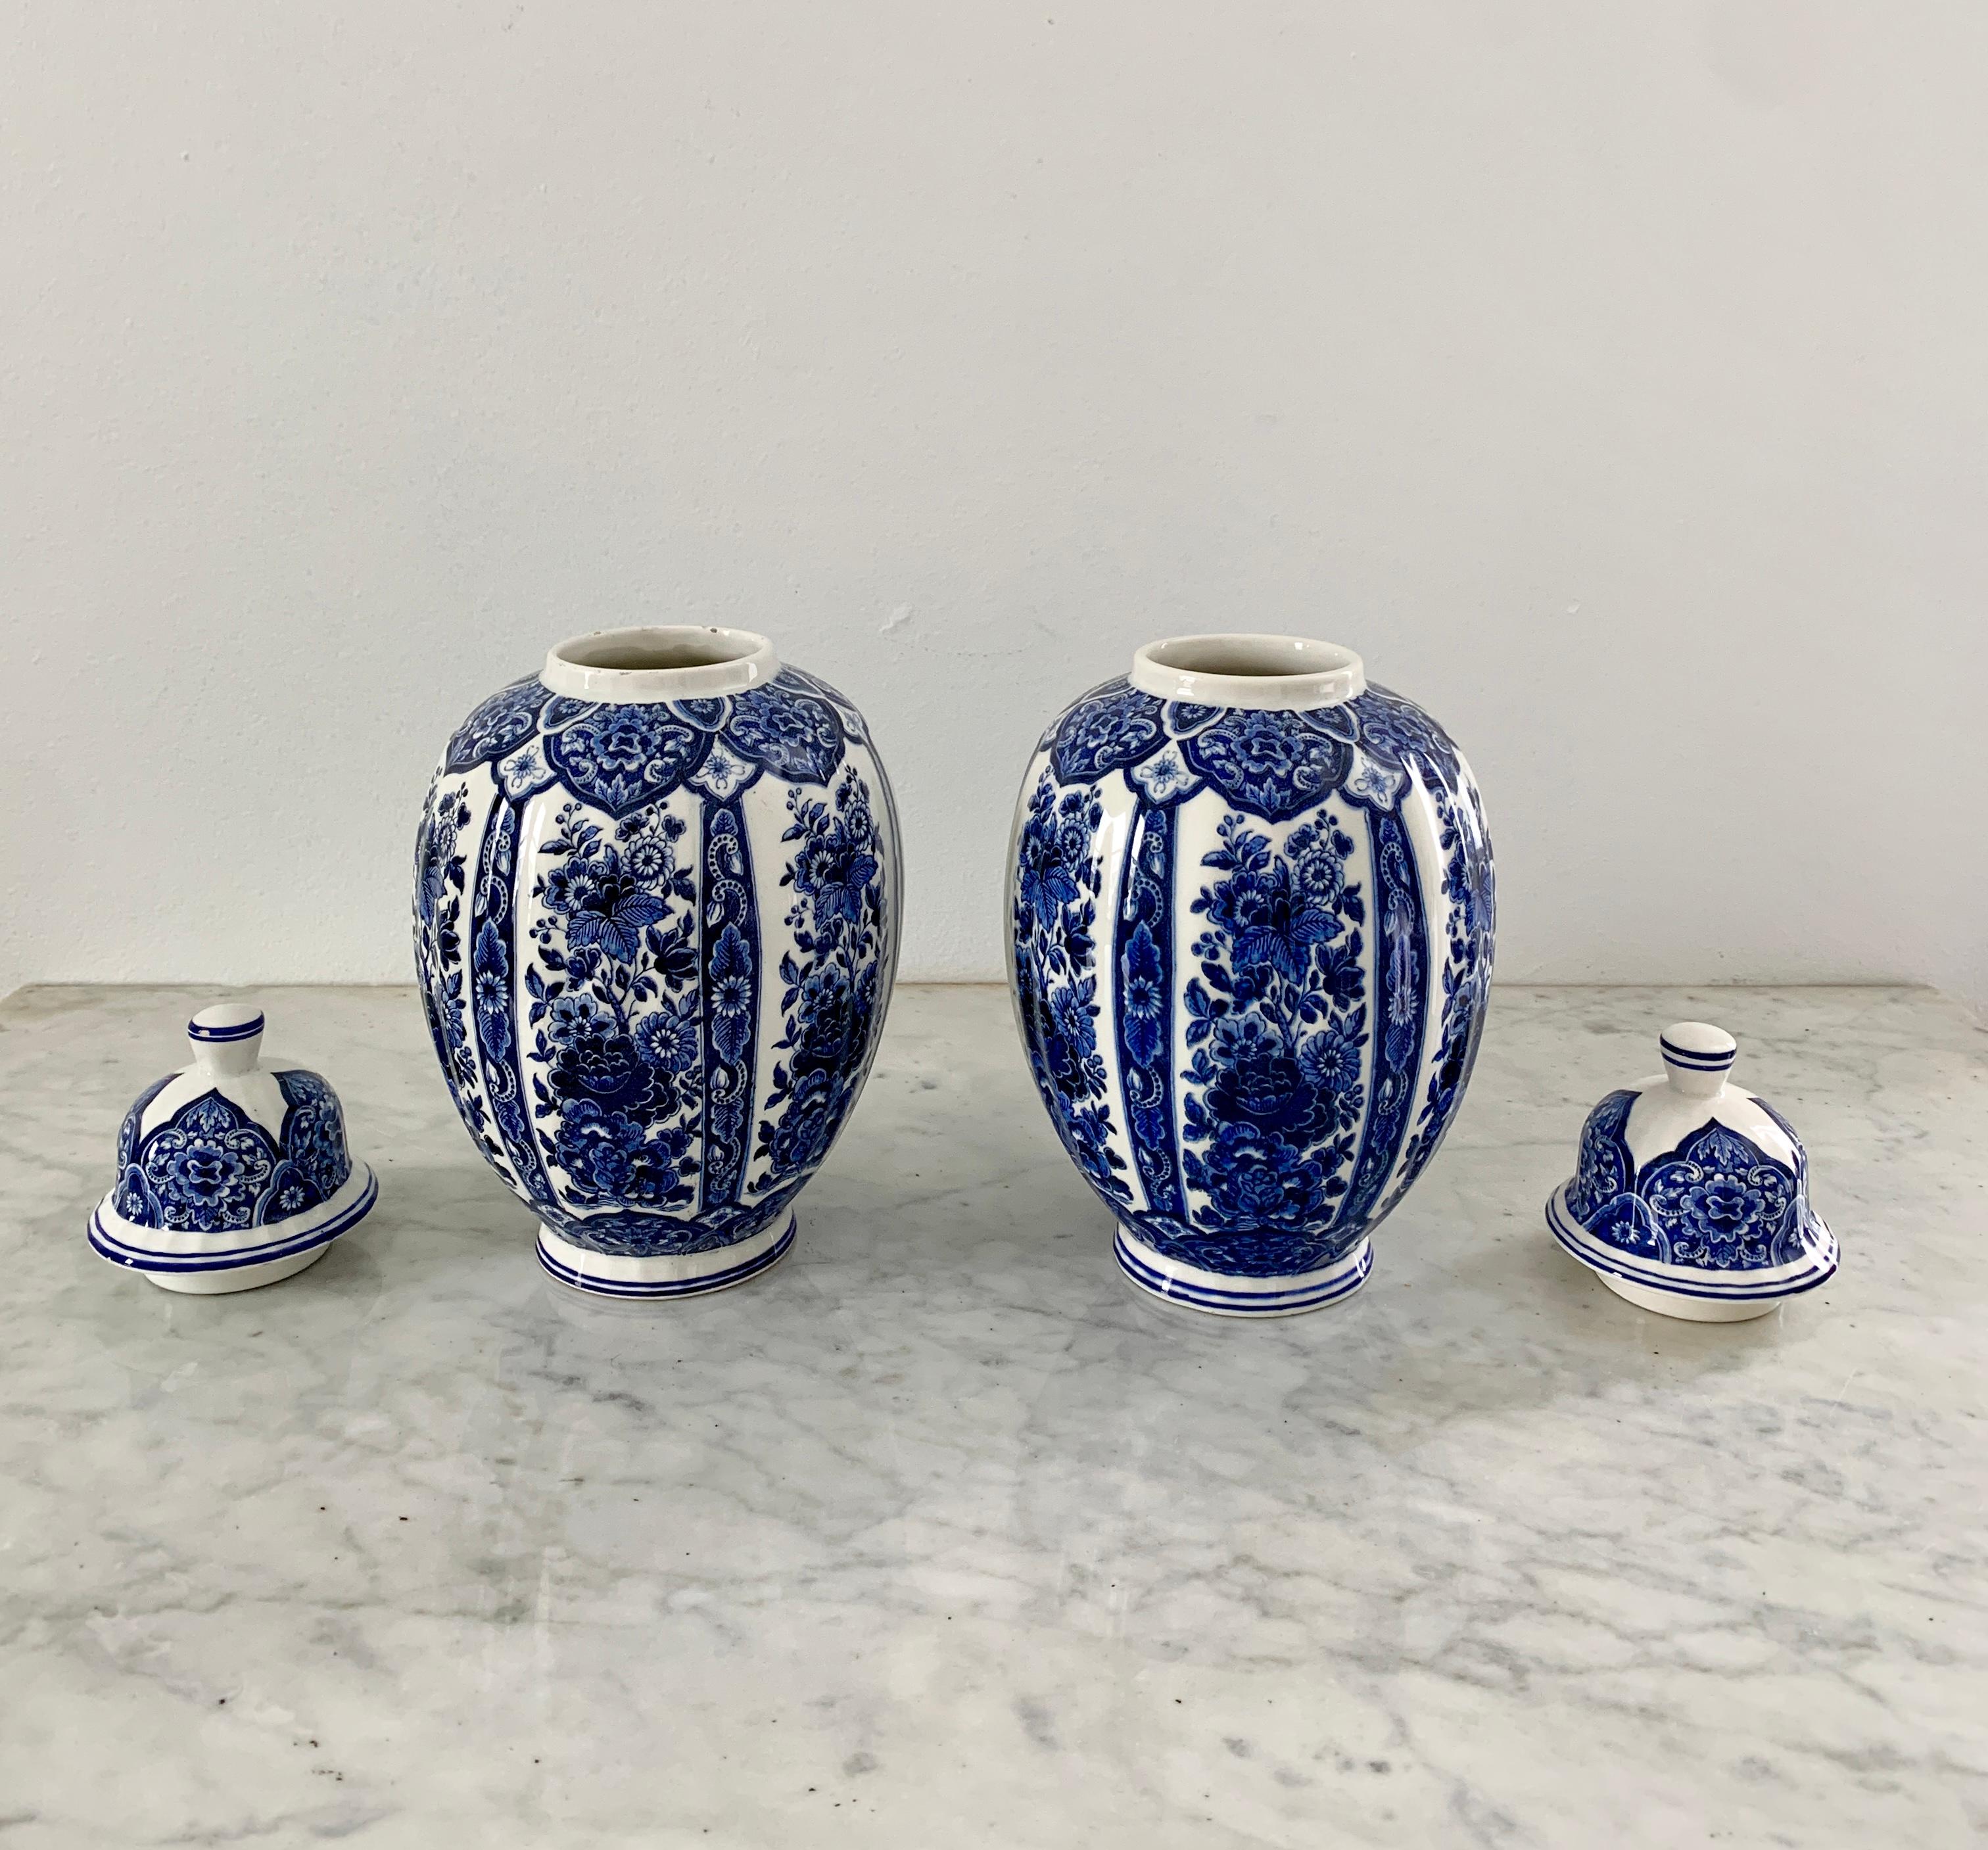 20th Century Italian Blue and White Porcelain Ginger Jars by Ardalt Blue Delfia, Pair